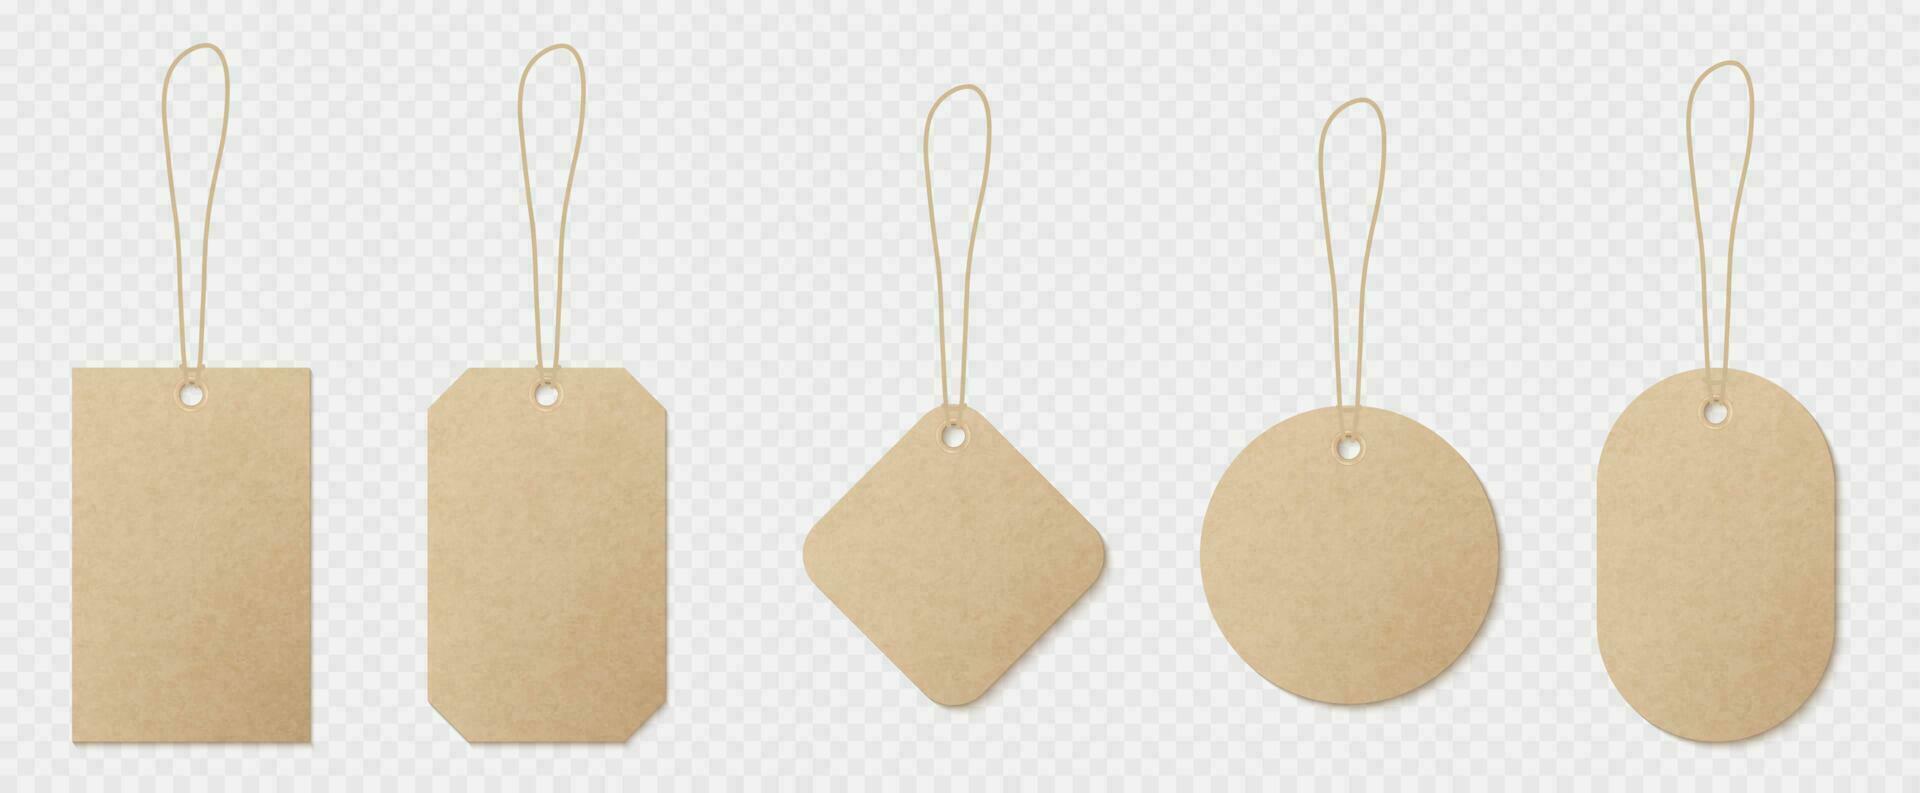 Realistic set of craft paper labels on string vector